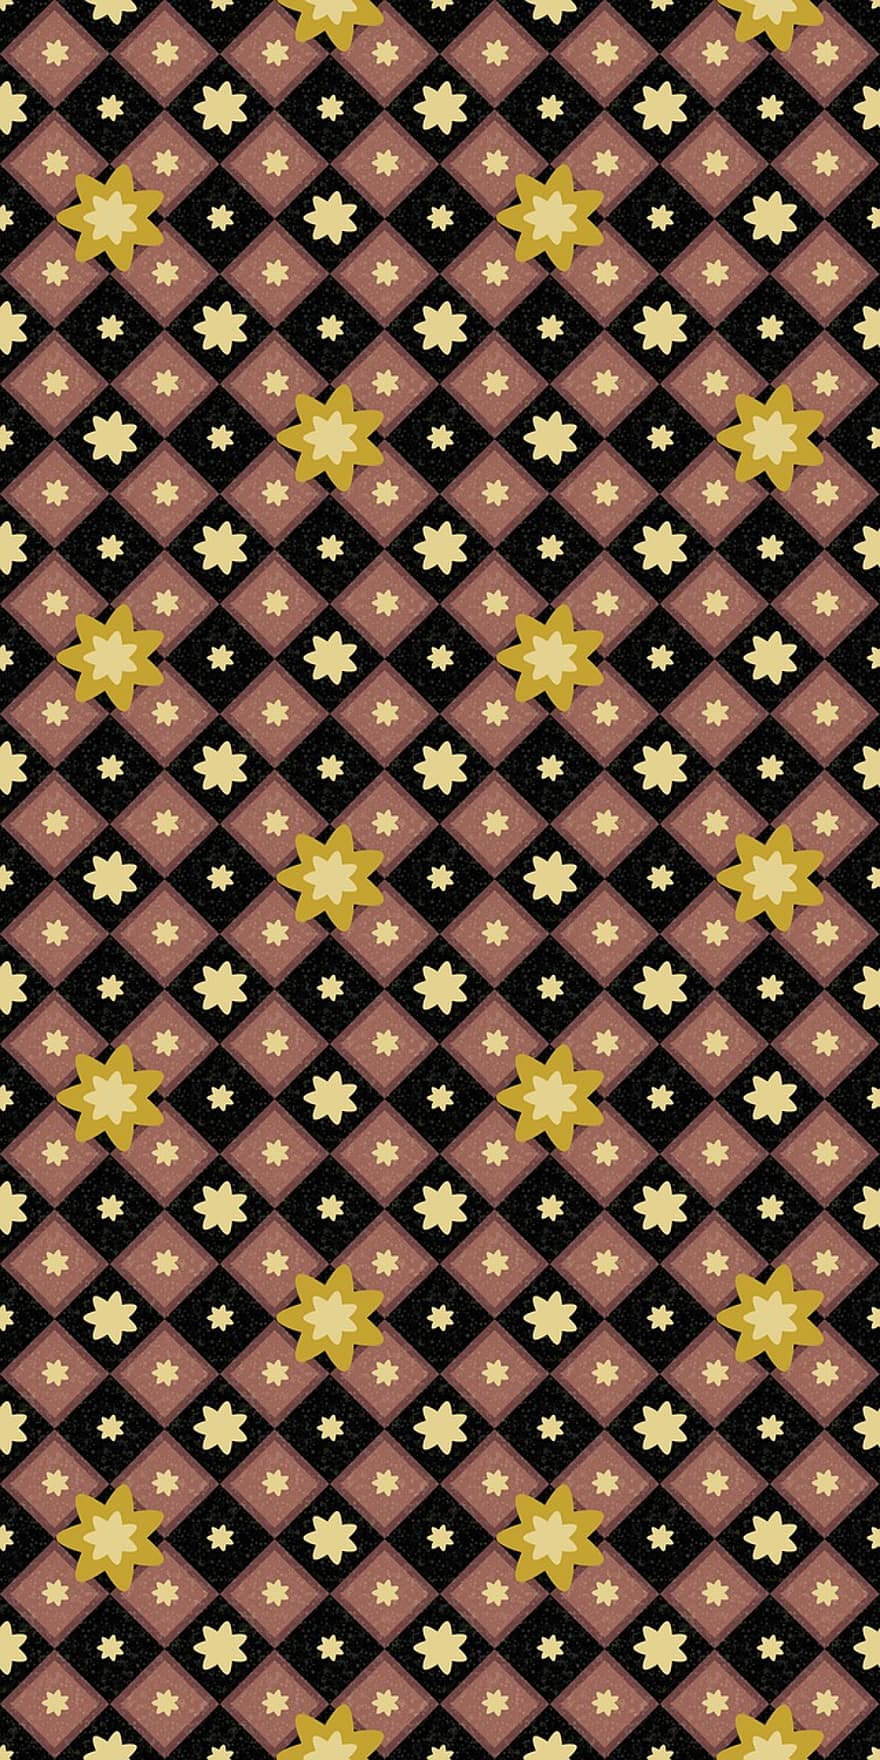 Stars, Pattern, Background, Wallpaper, Geometric, Starry, Astronomy, Cosmos, Scattered, Gold, Gilded